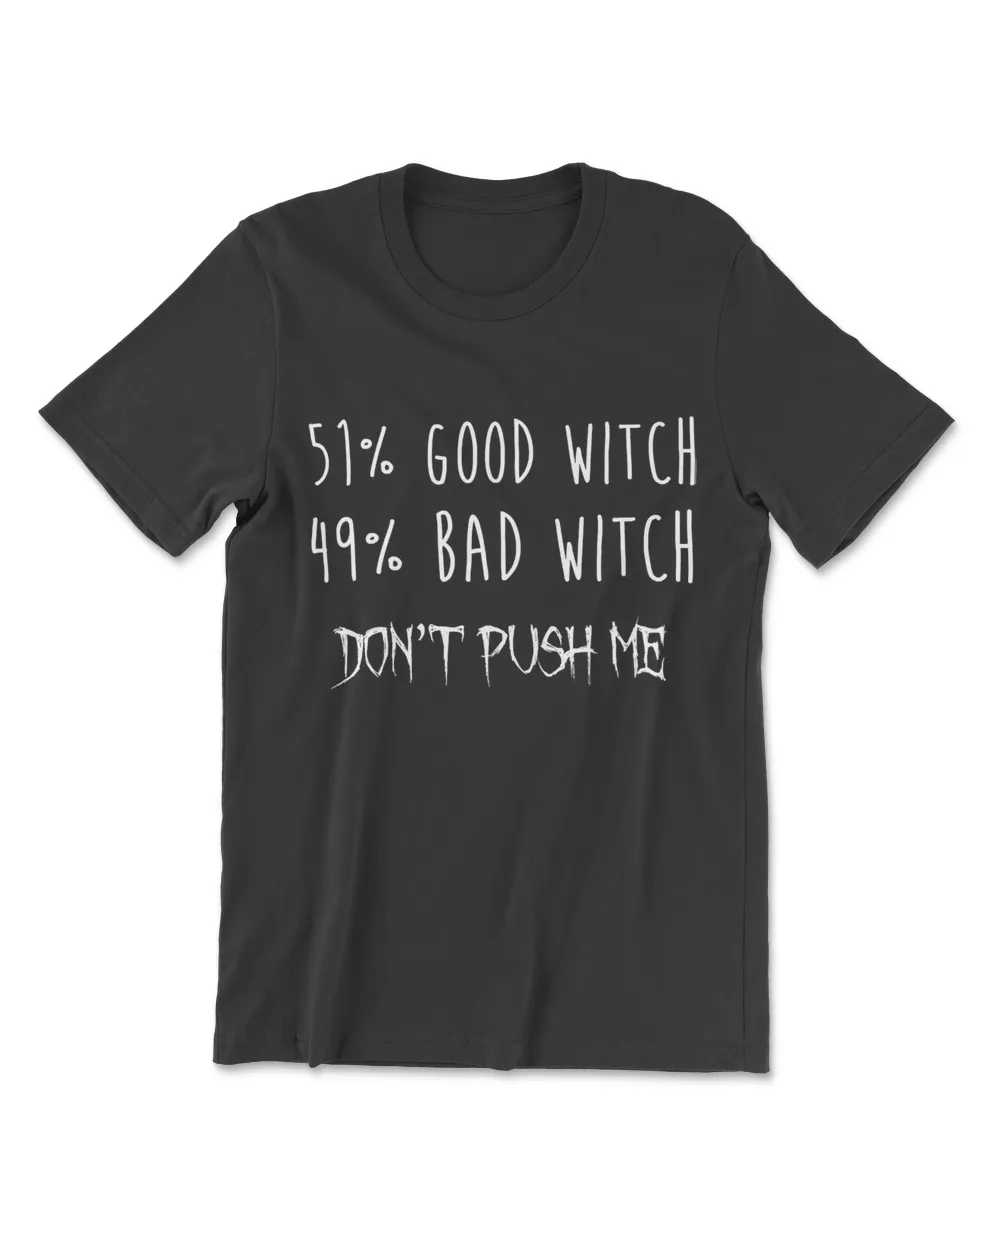 51 Good Witch 49 Bad Witch Premium T-Shirt